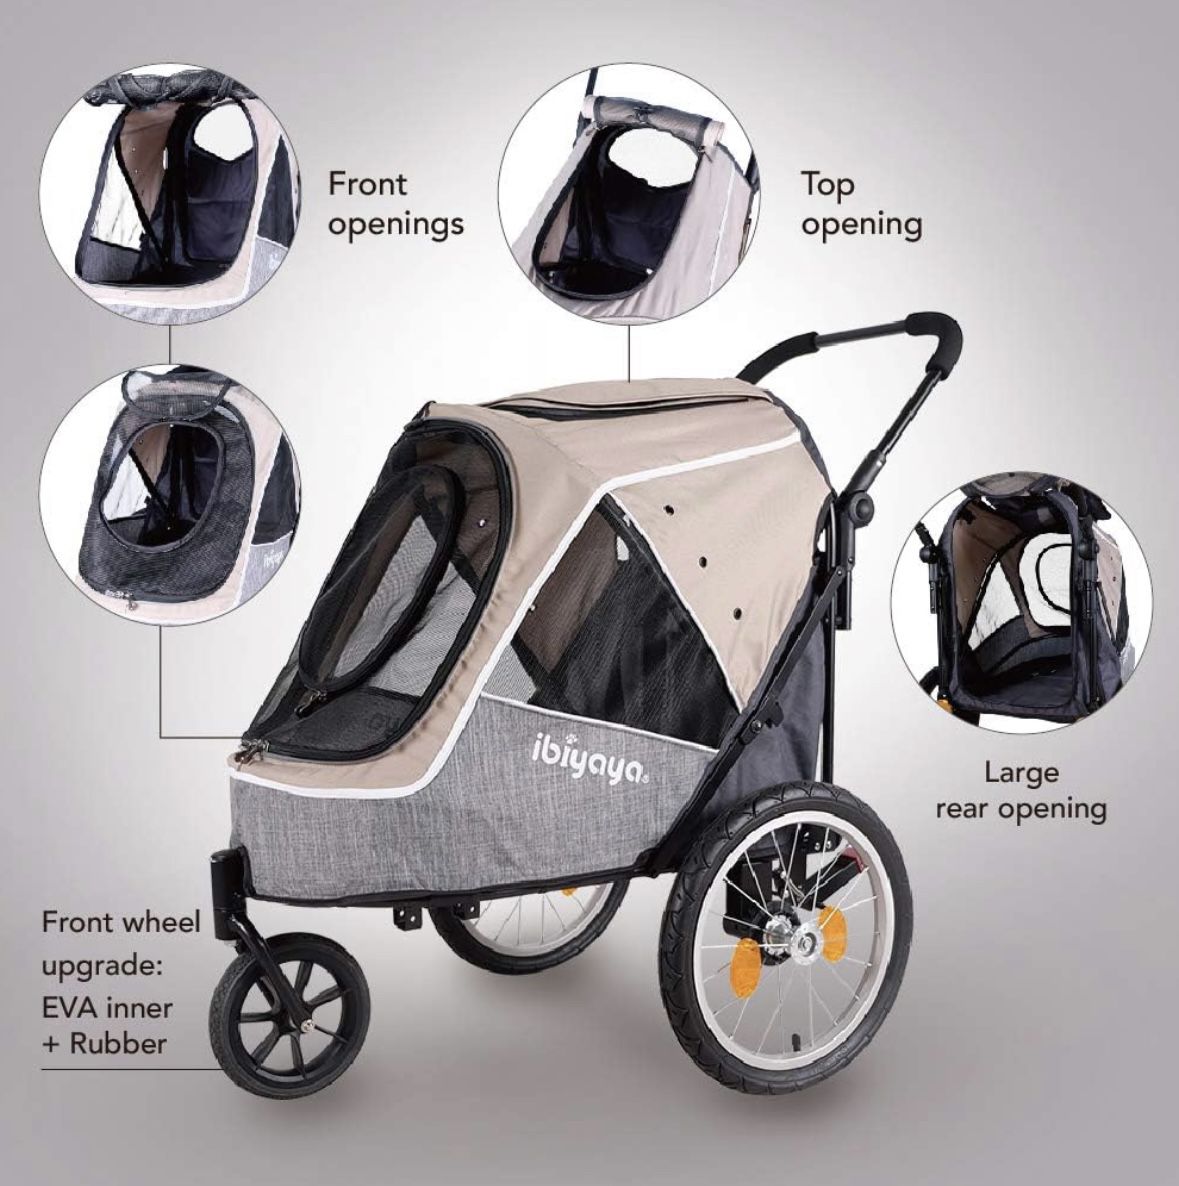 ibiyaya - Happy Pet Dog Stroller Trailer for Dogs - Pet Stroller for Medium and Large Dogs with Air-Filled Tires and Rear Brake System